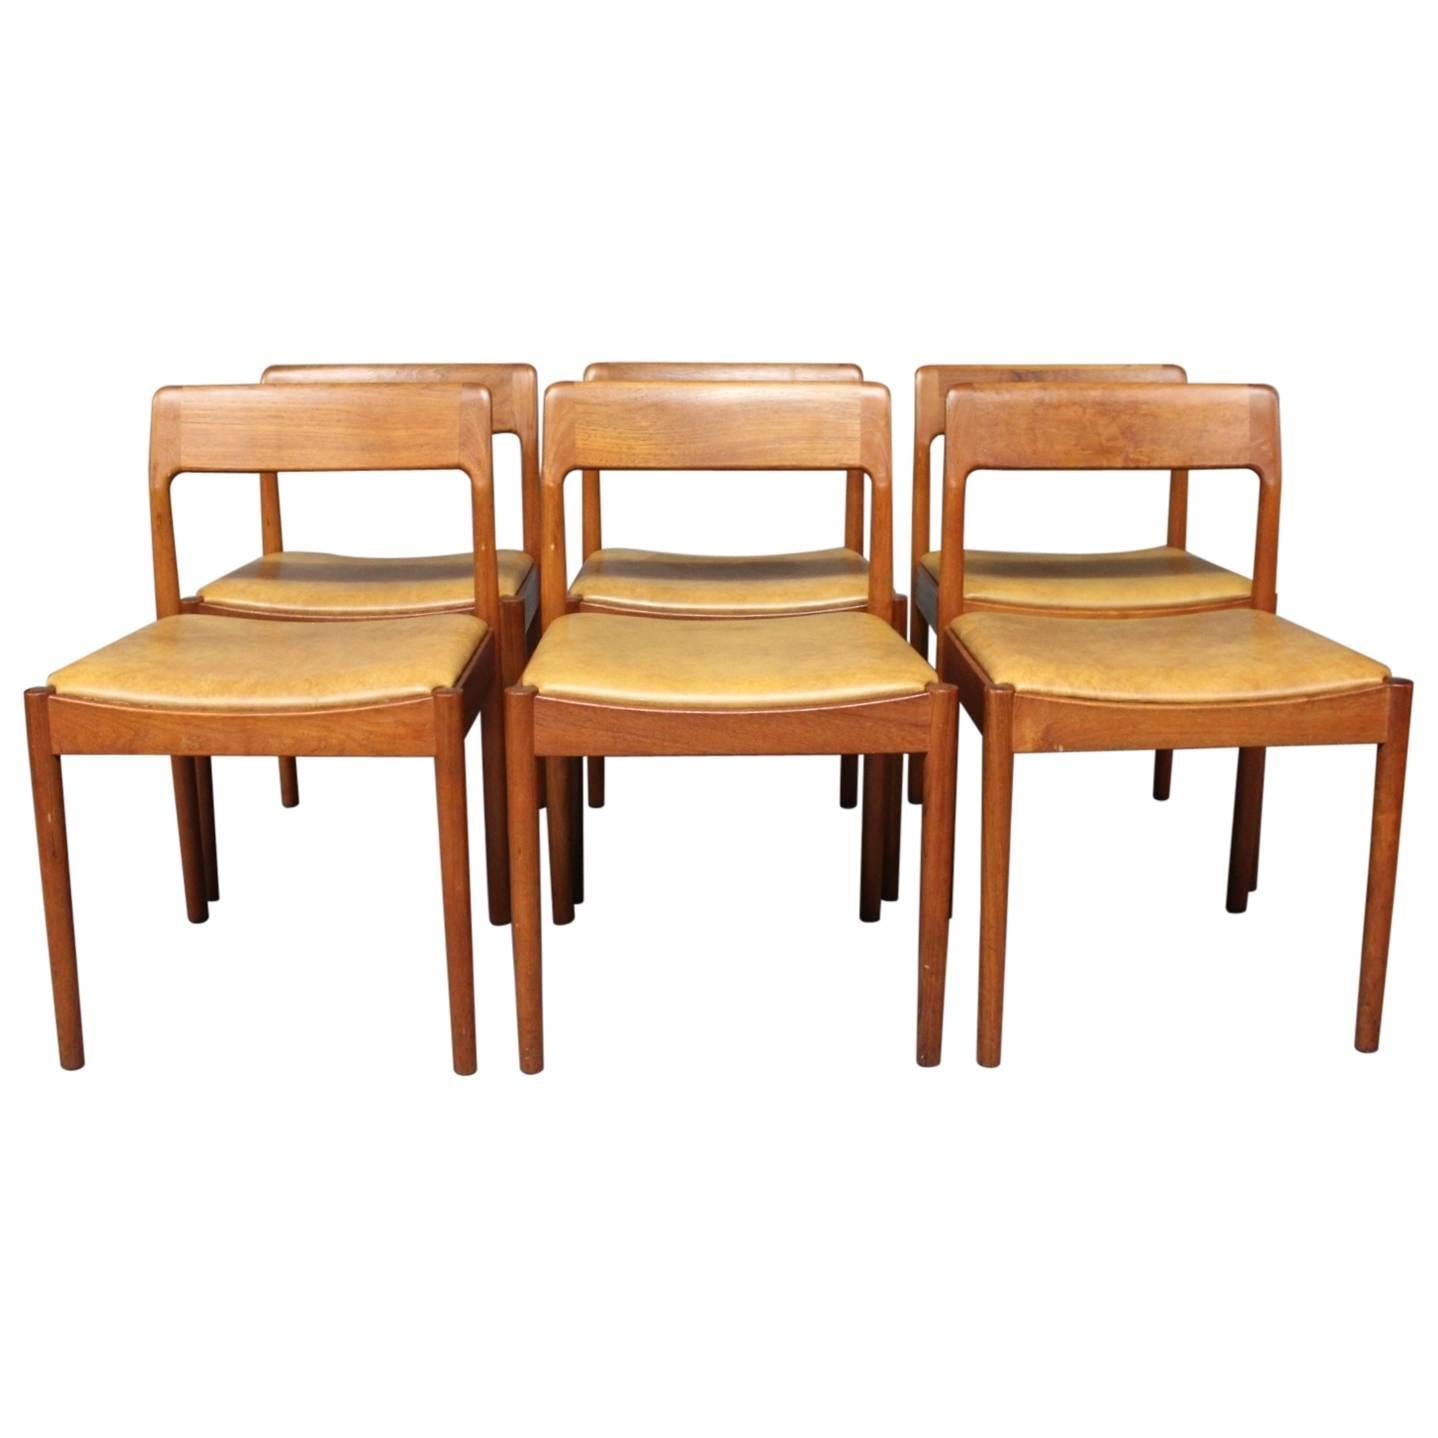 Set of Six Dining Room Chairs in Teak by N.O. Møller, 1960s